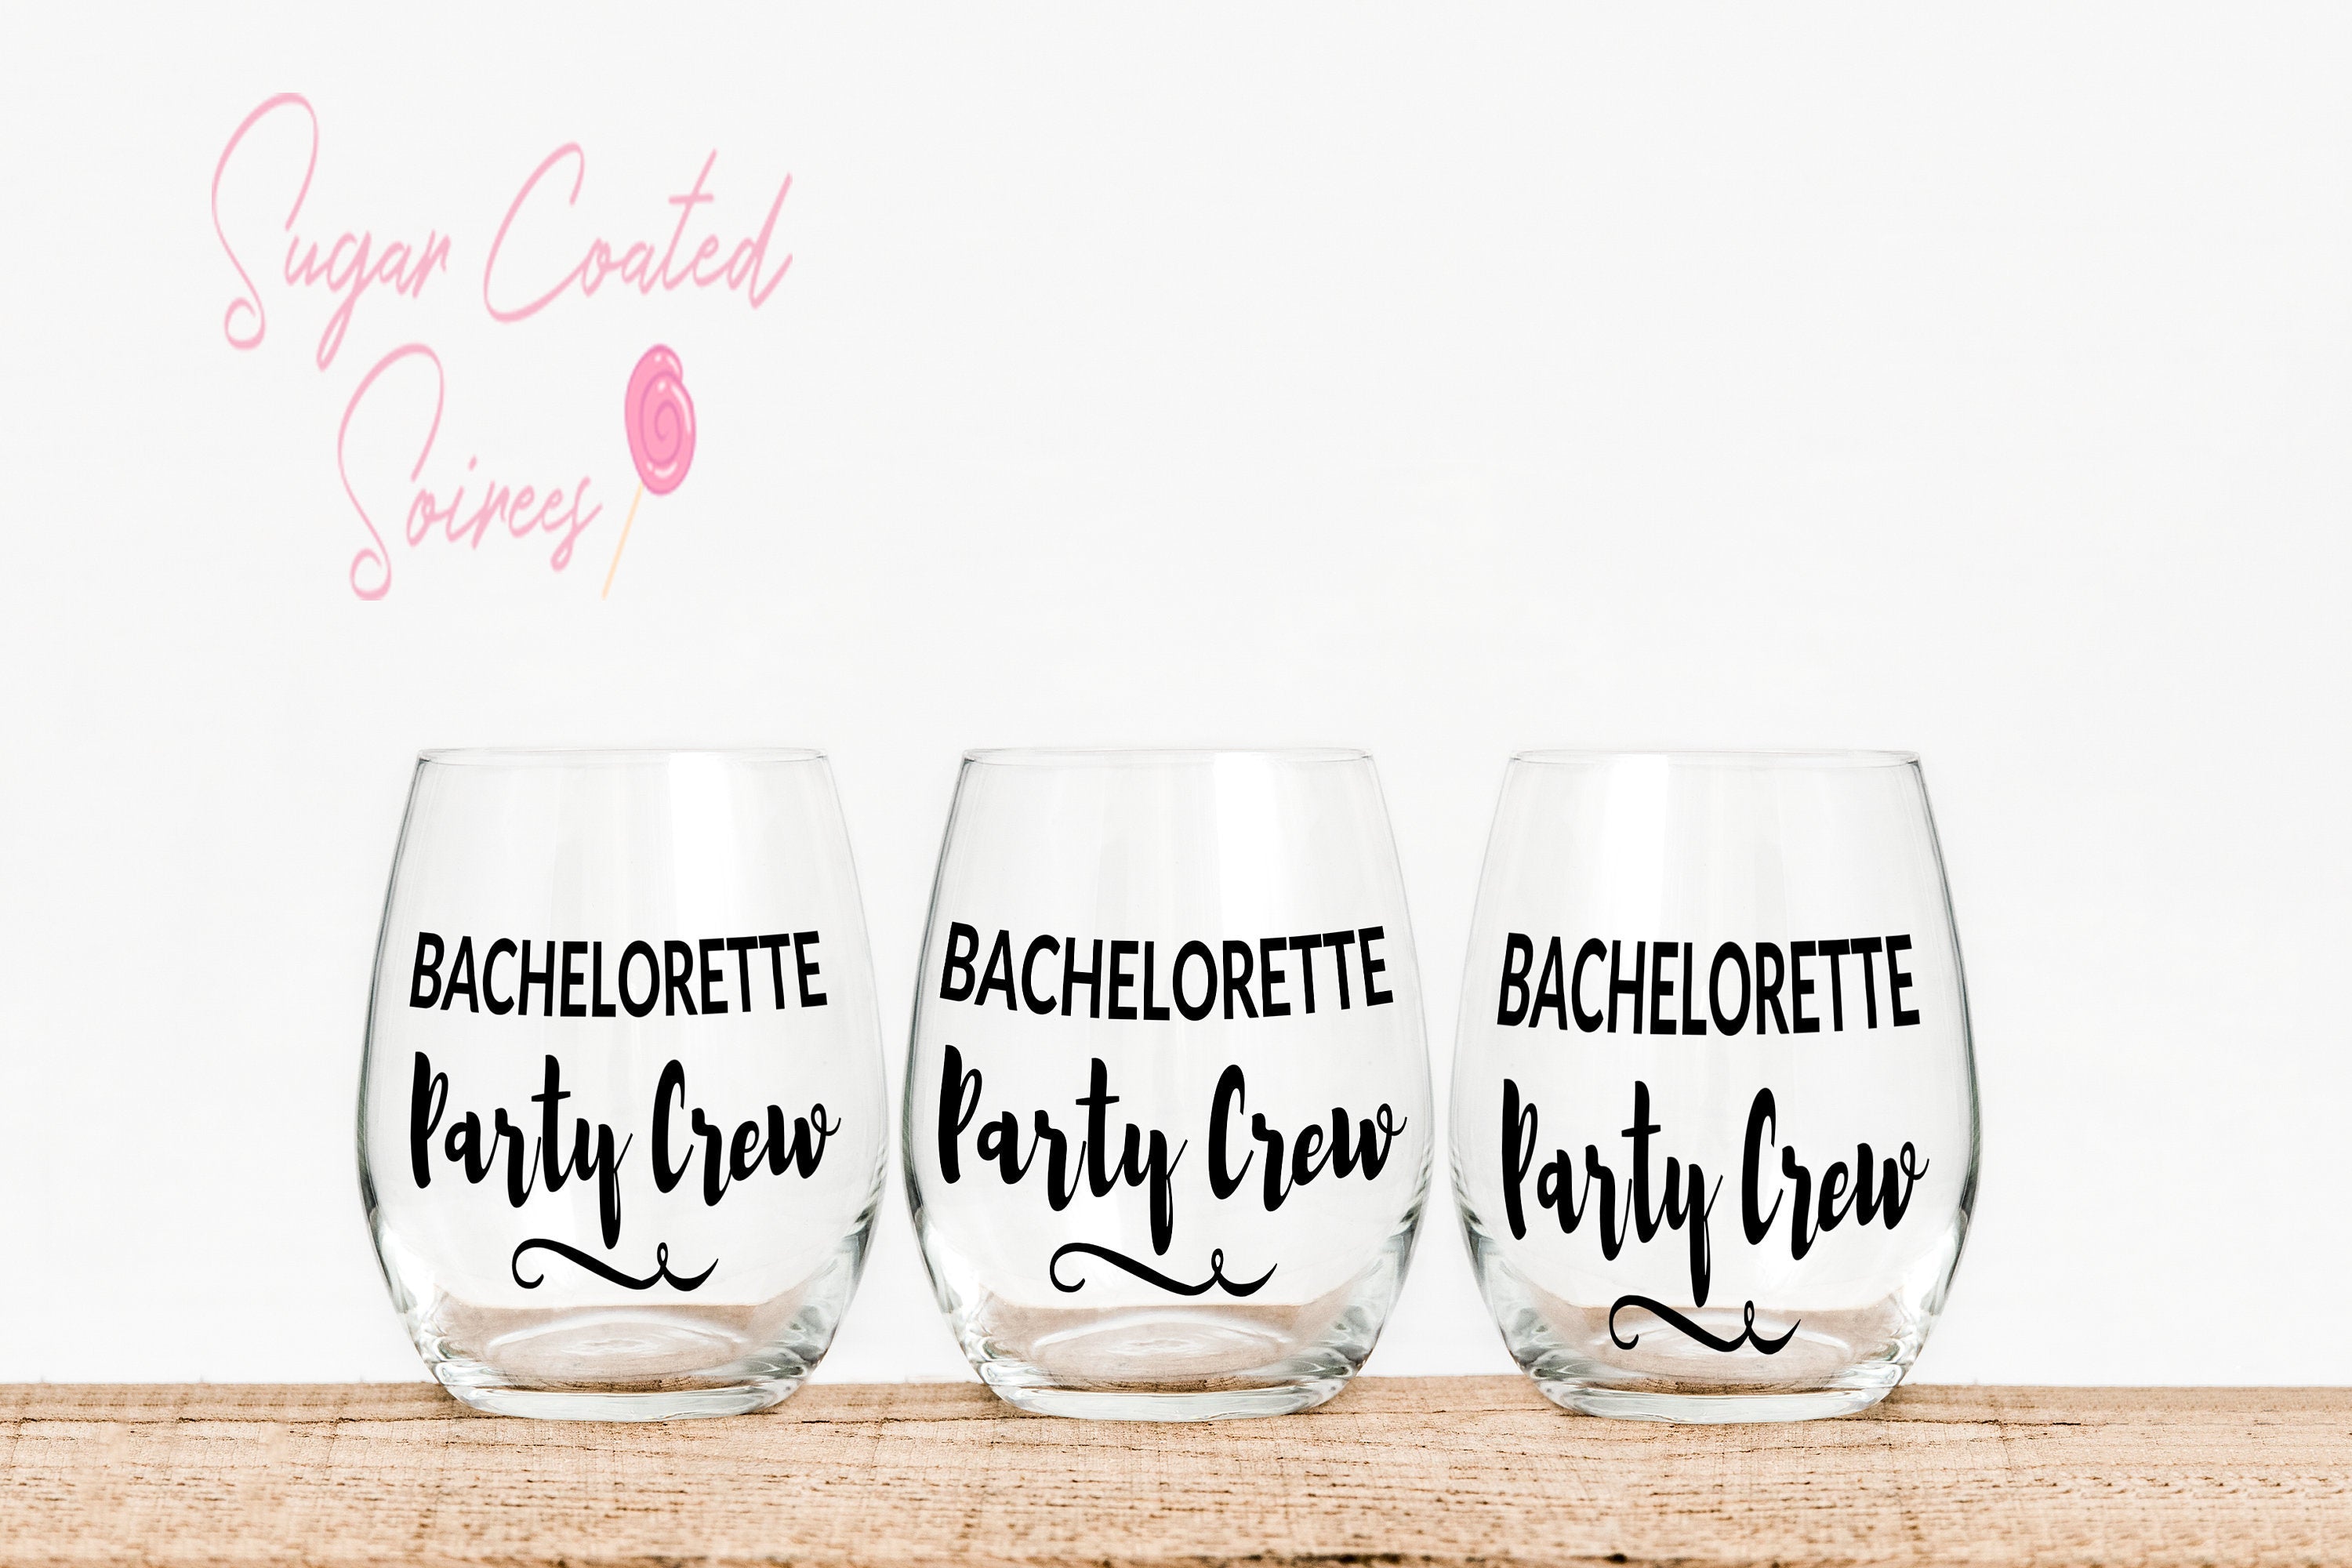 Wedding wine glasses, Bachelorette Party Crew, Bridal Wine Glasses, Girls Night Out, Girls Weekend, Bachelorette Party, bridesmaid glasses